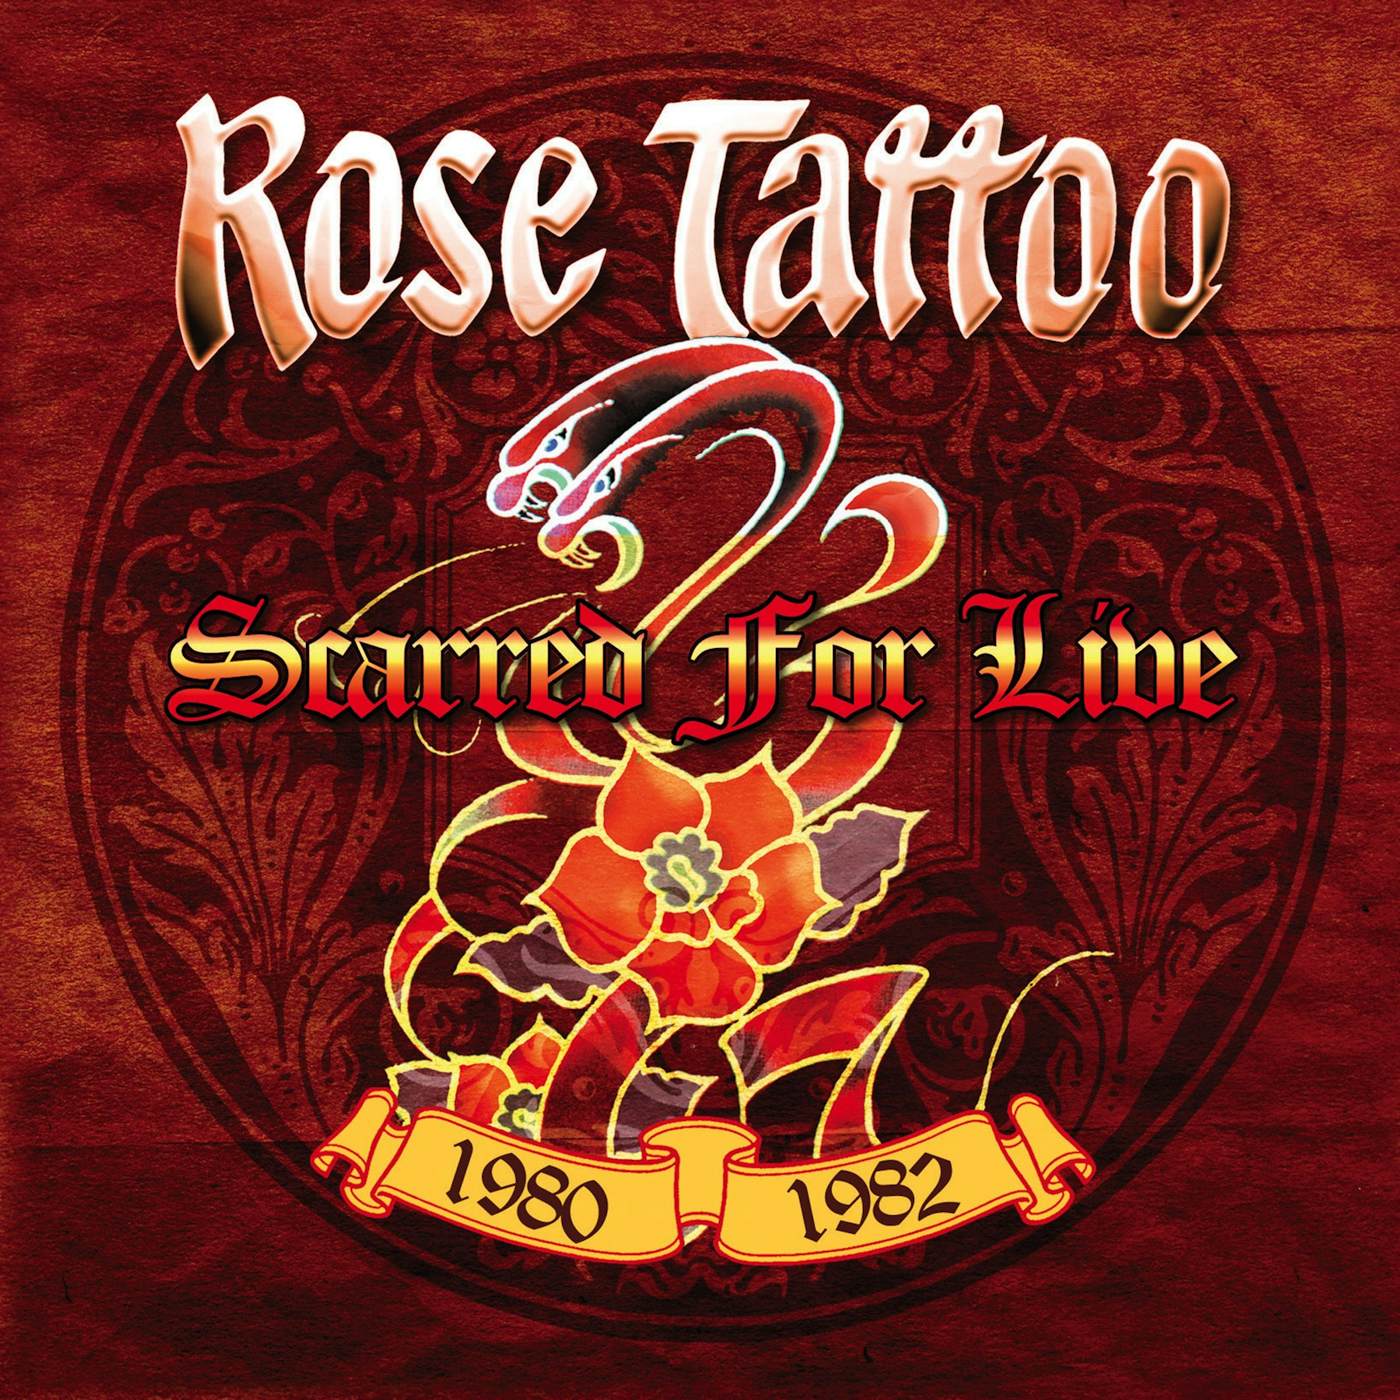 Rose Tattoo Scarred For Live: 1980-1982 Vinyl Record